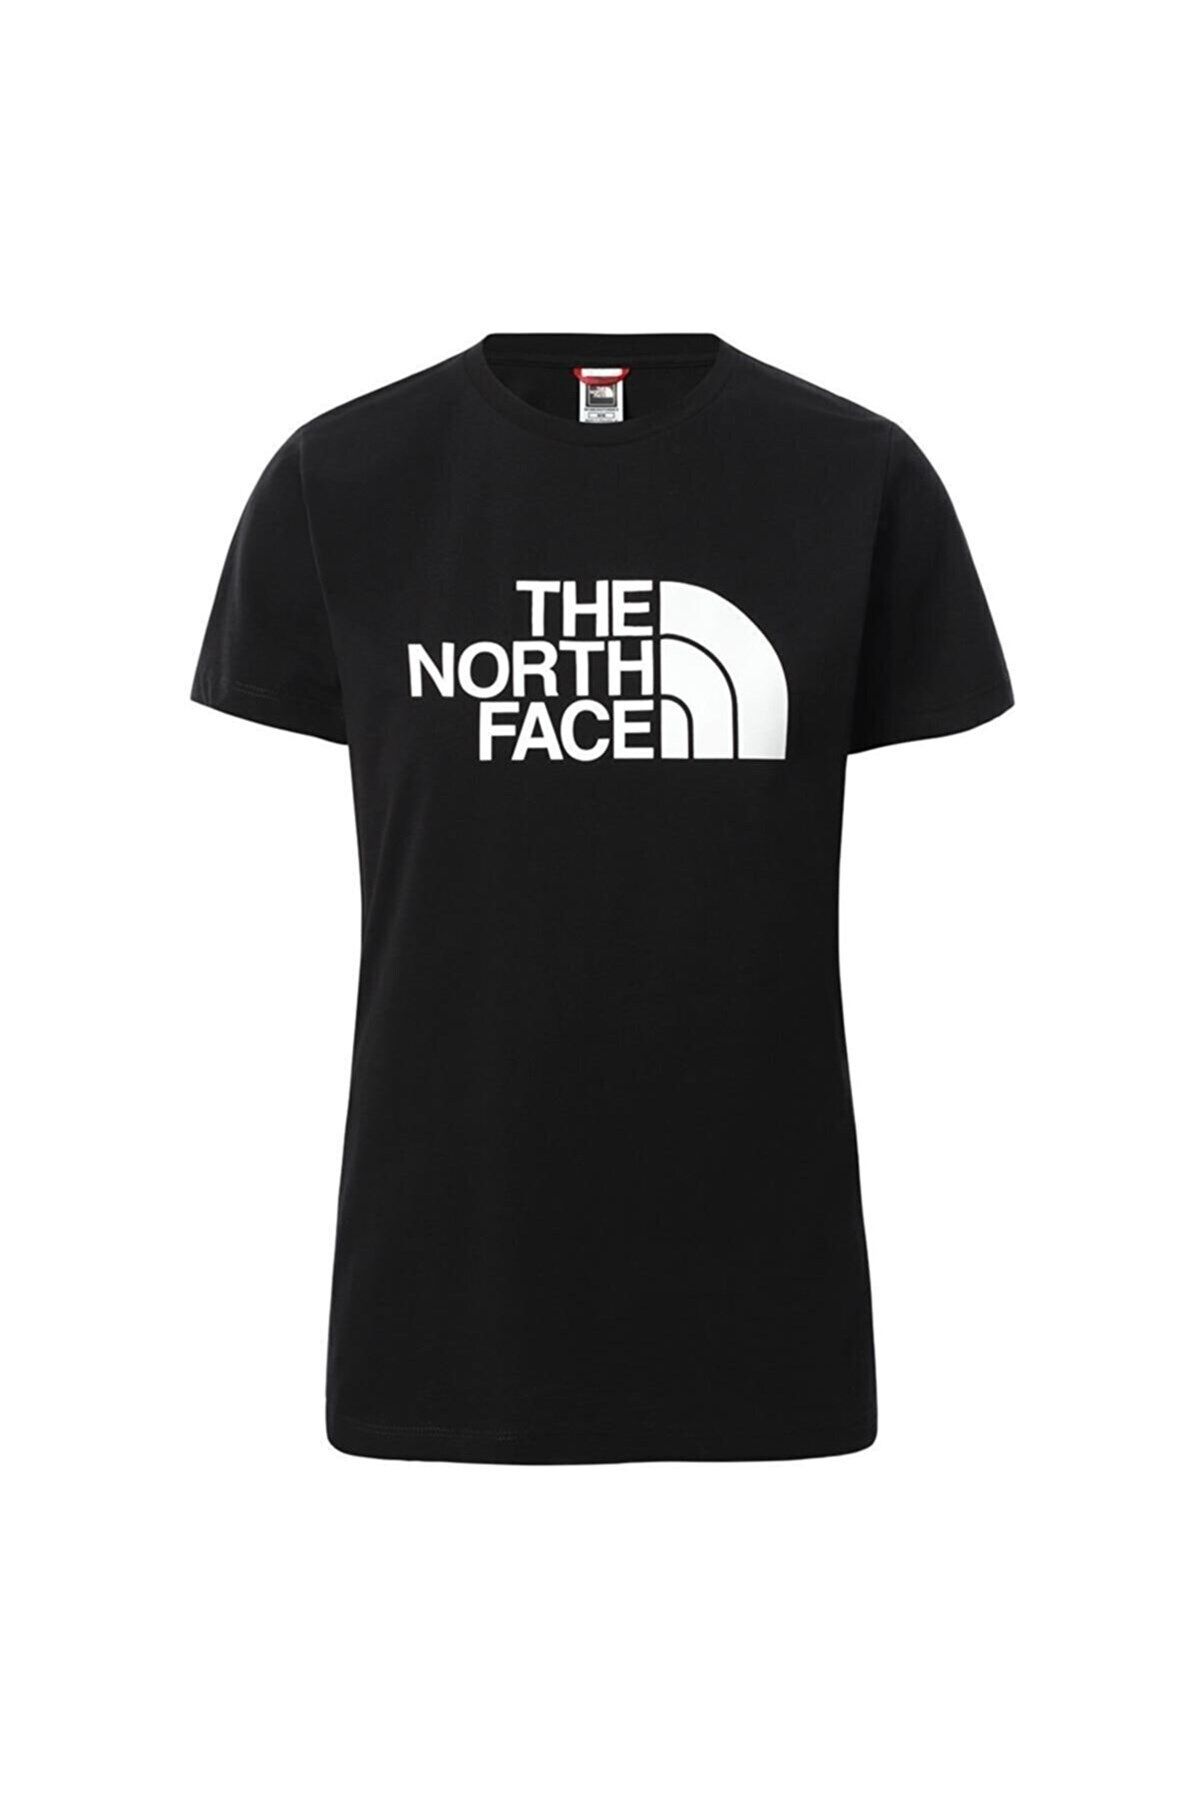 The North Face The Nort Face W S/s Easy Tee Kadın T-shirt Nf0a4t1qjk31